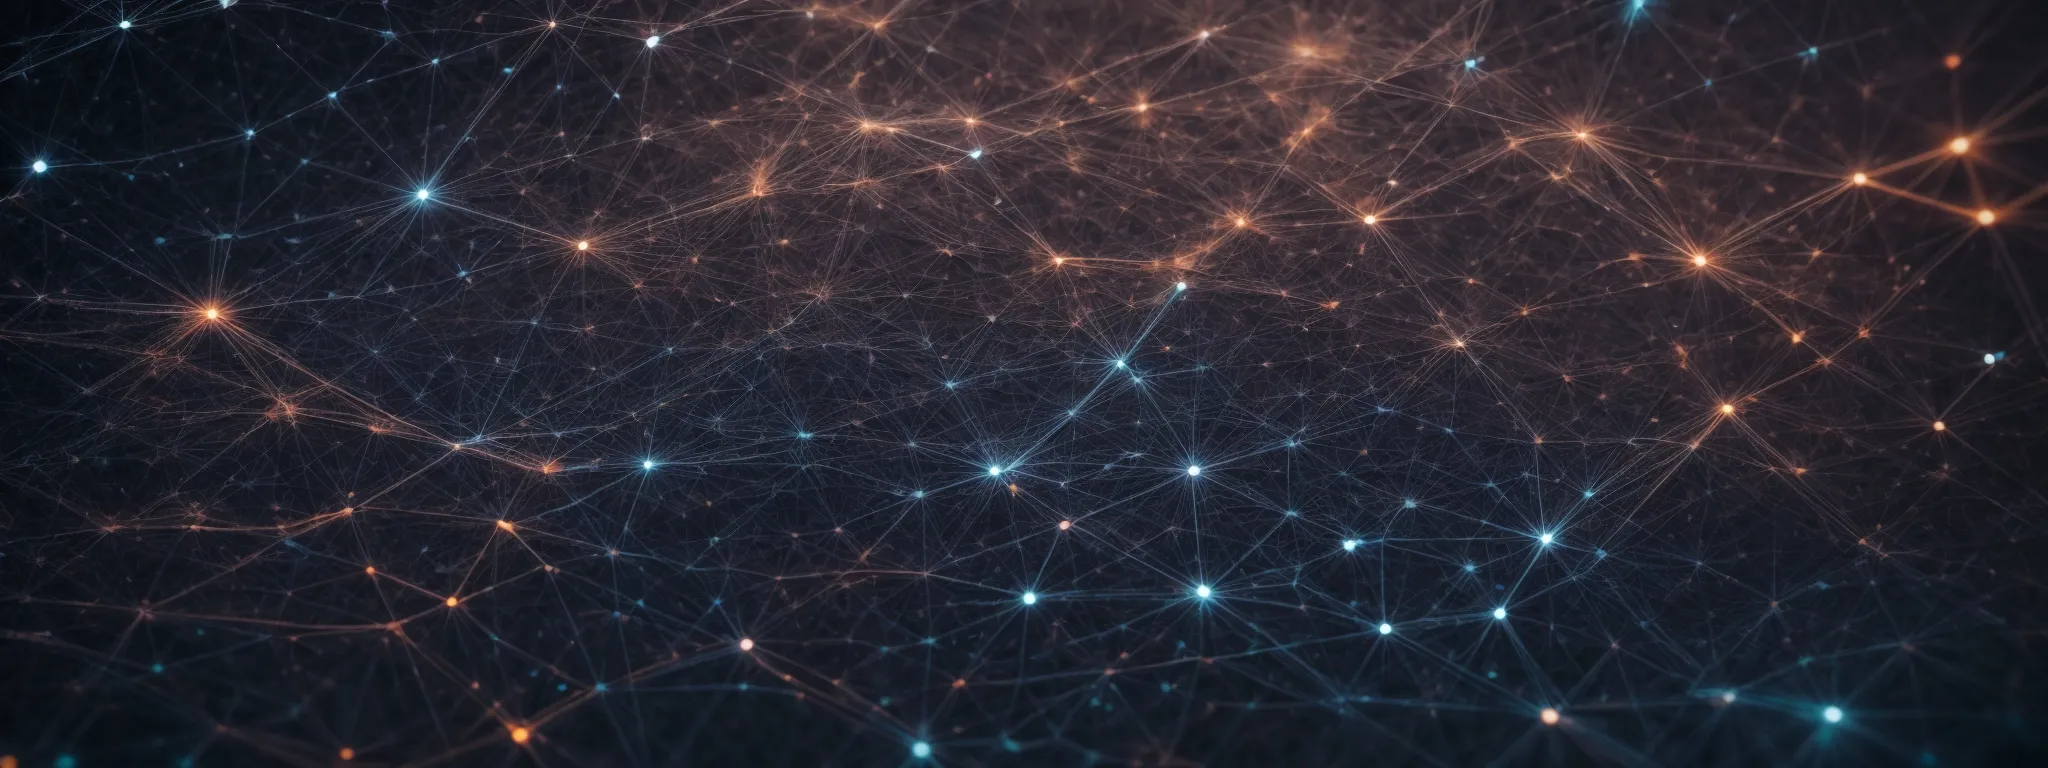 a vast network of interconnected nodes representing websites linking to a central authoritative hub in a digital ecosystem.